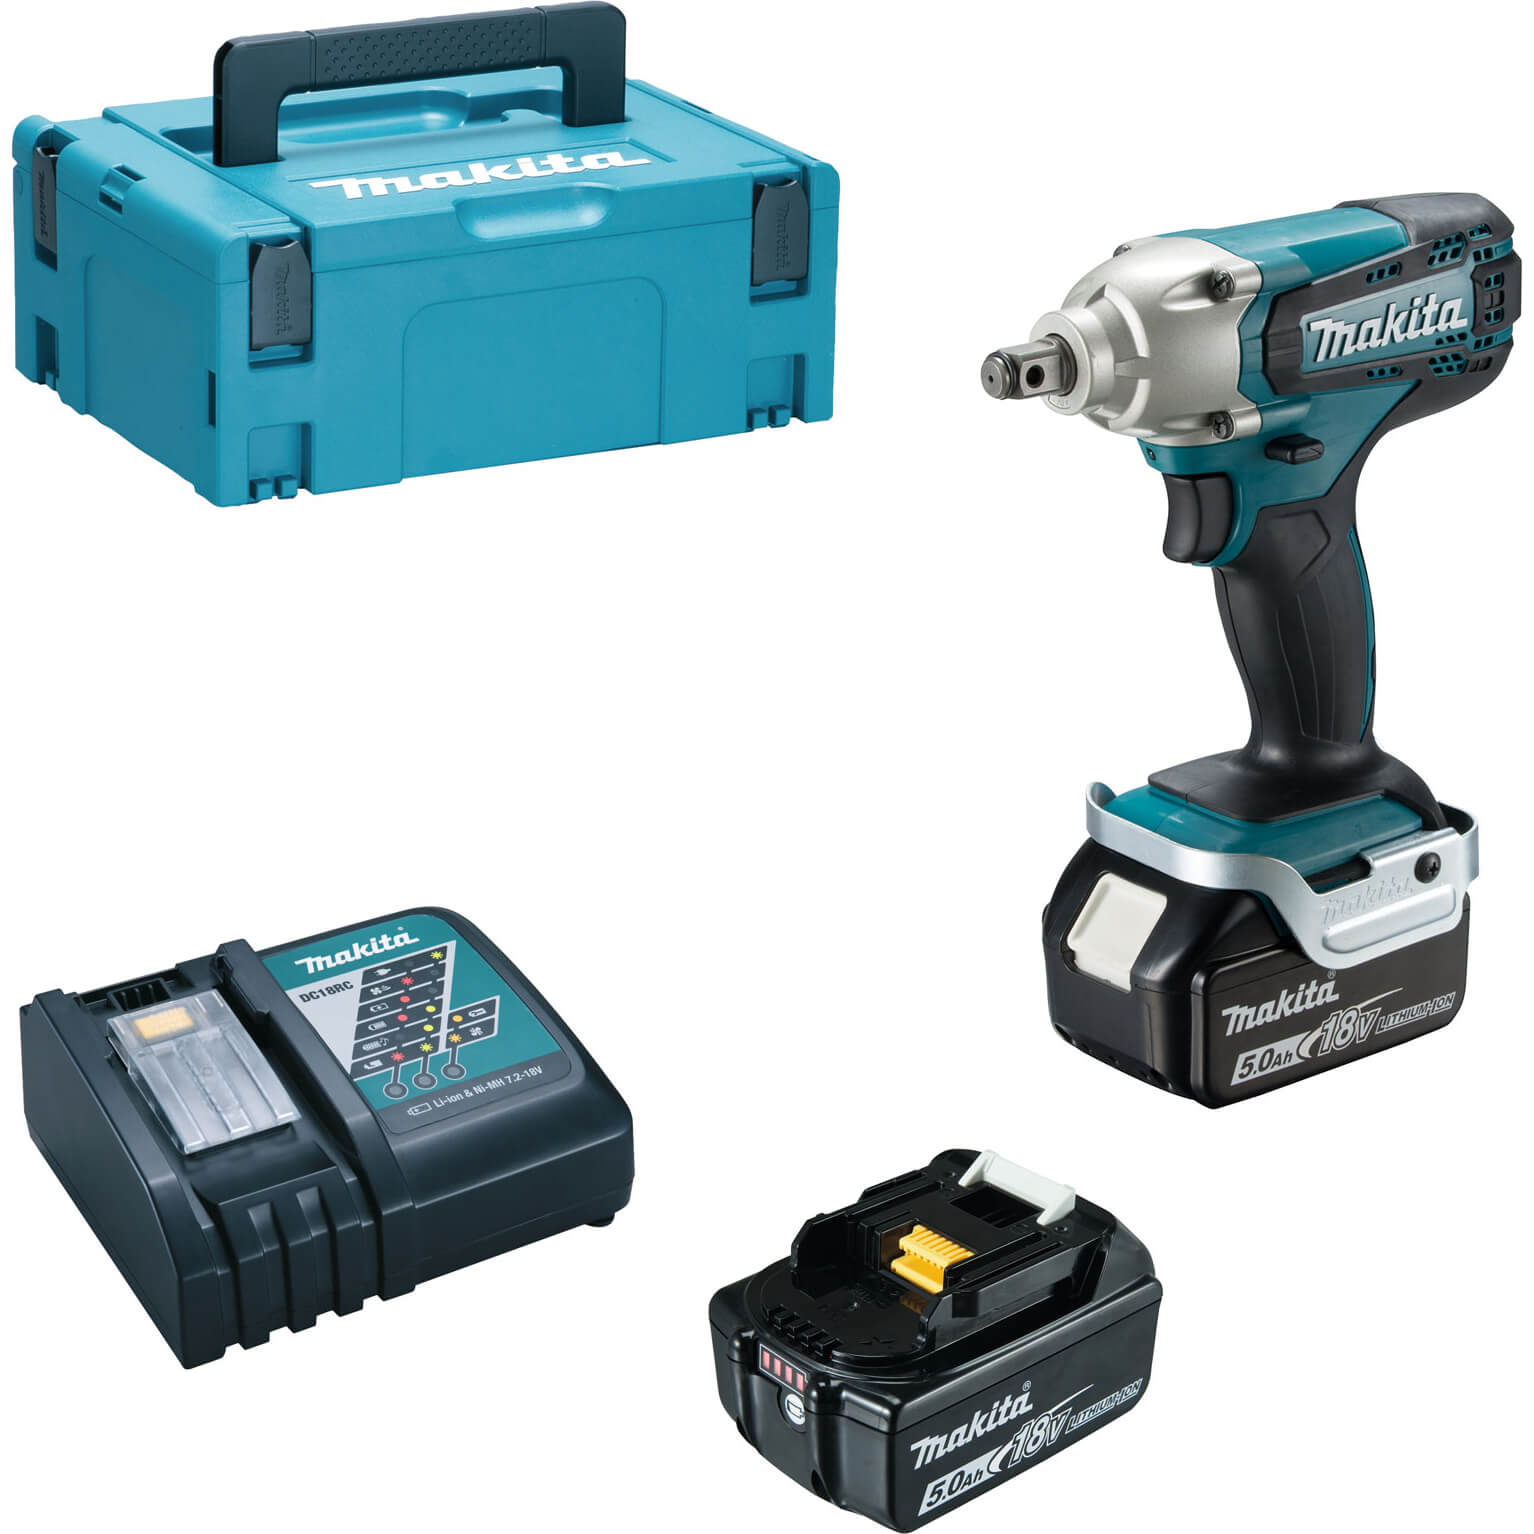 Image of Makita DTW190 18v LXT Cordless 1/2" Drive Impact Wrench 2 x 5ah Li-ion Charger Case